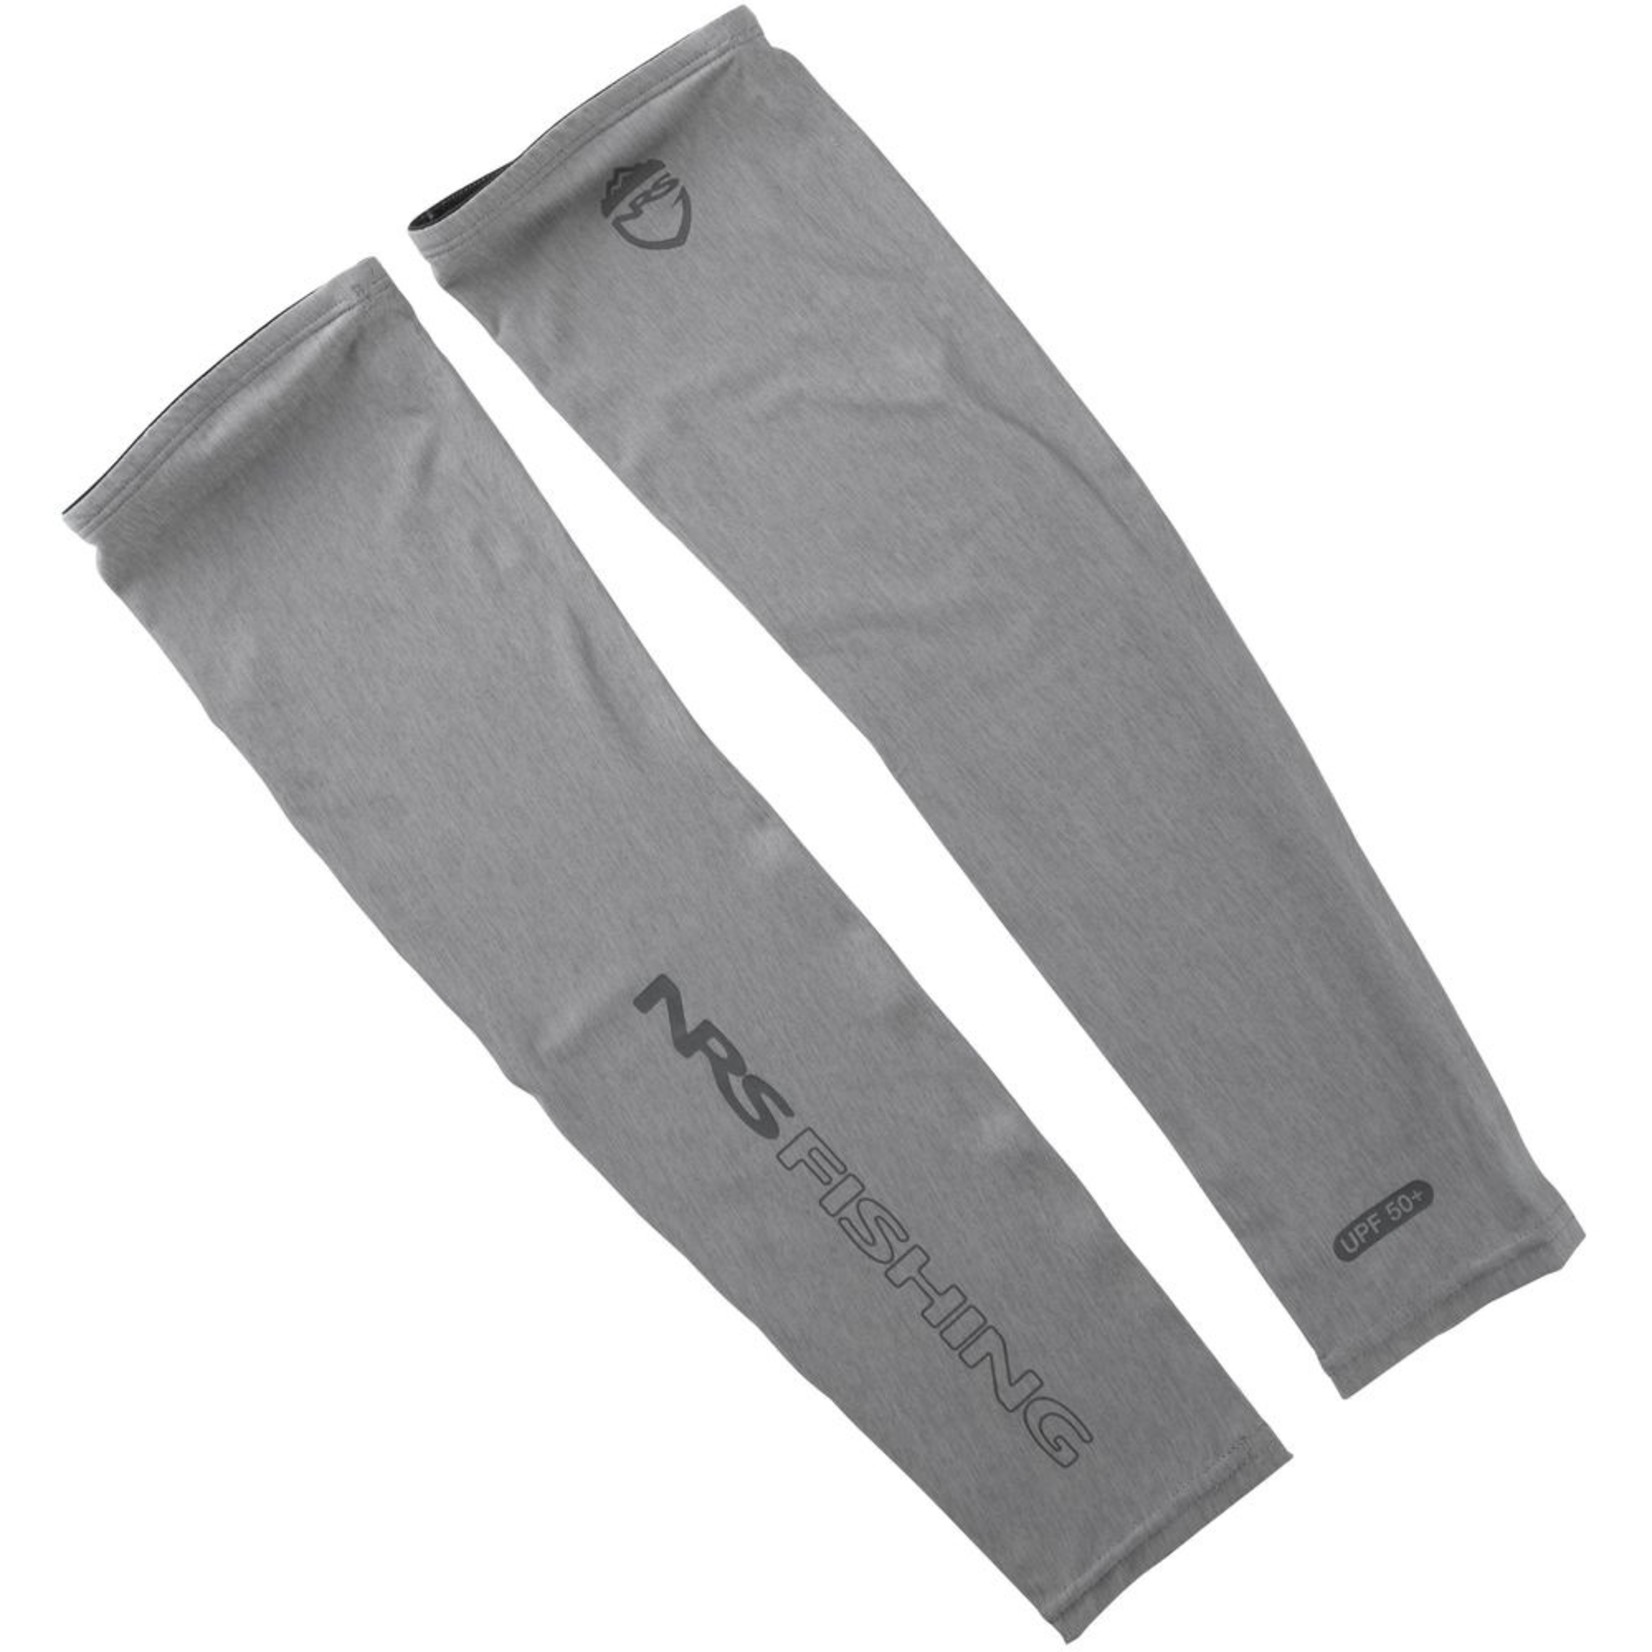 NRS NRS H20zone Sun Sleeves Size: S/M, Color: Sharkskin